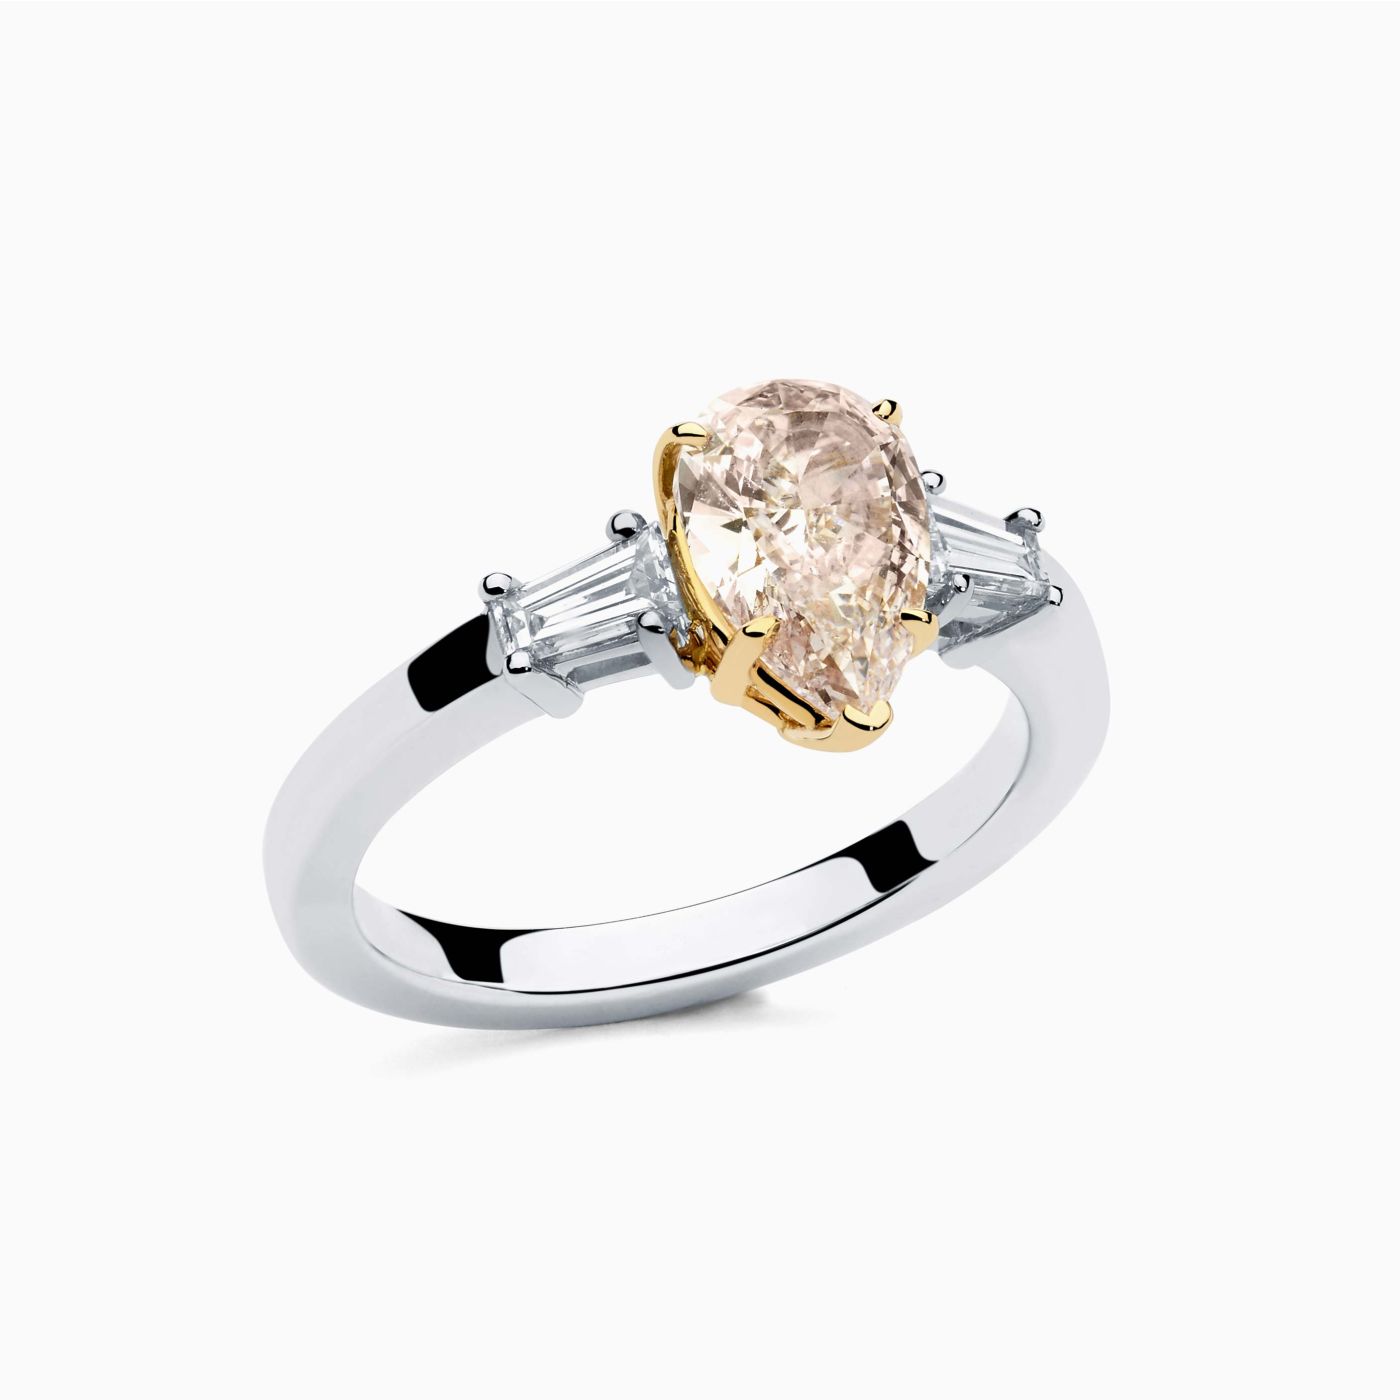 Platinum with pink fancy diamond in the center solitaire ring